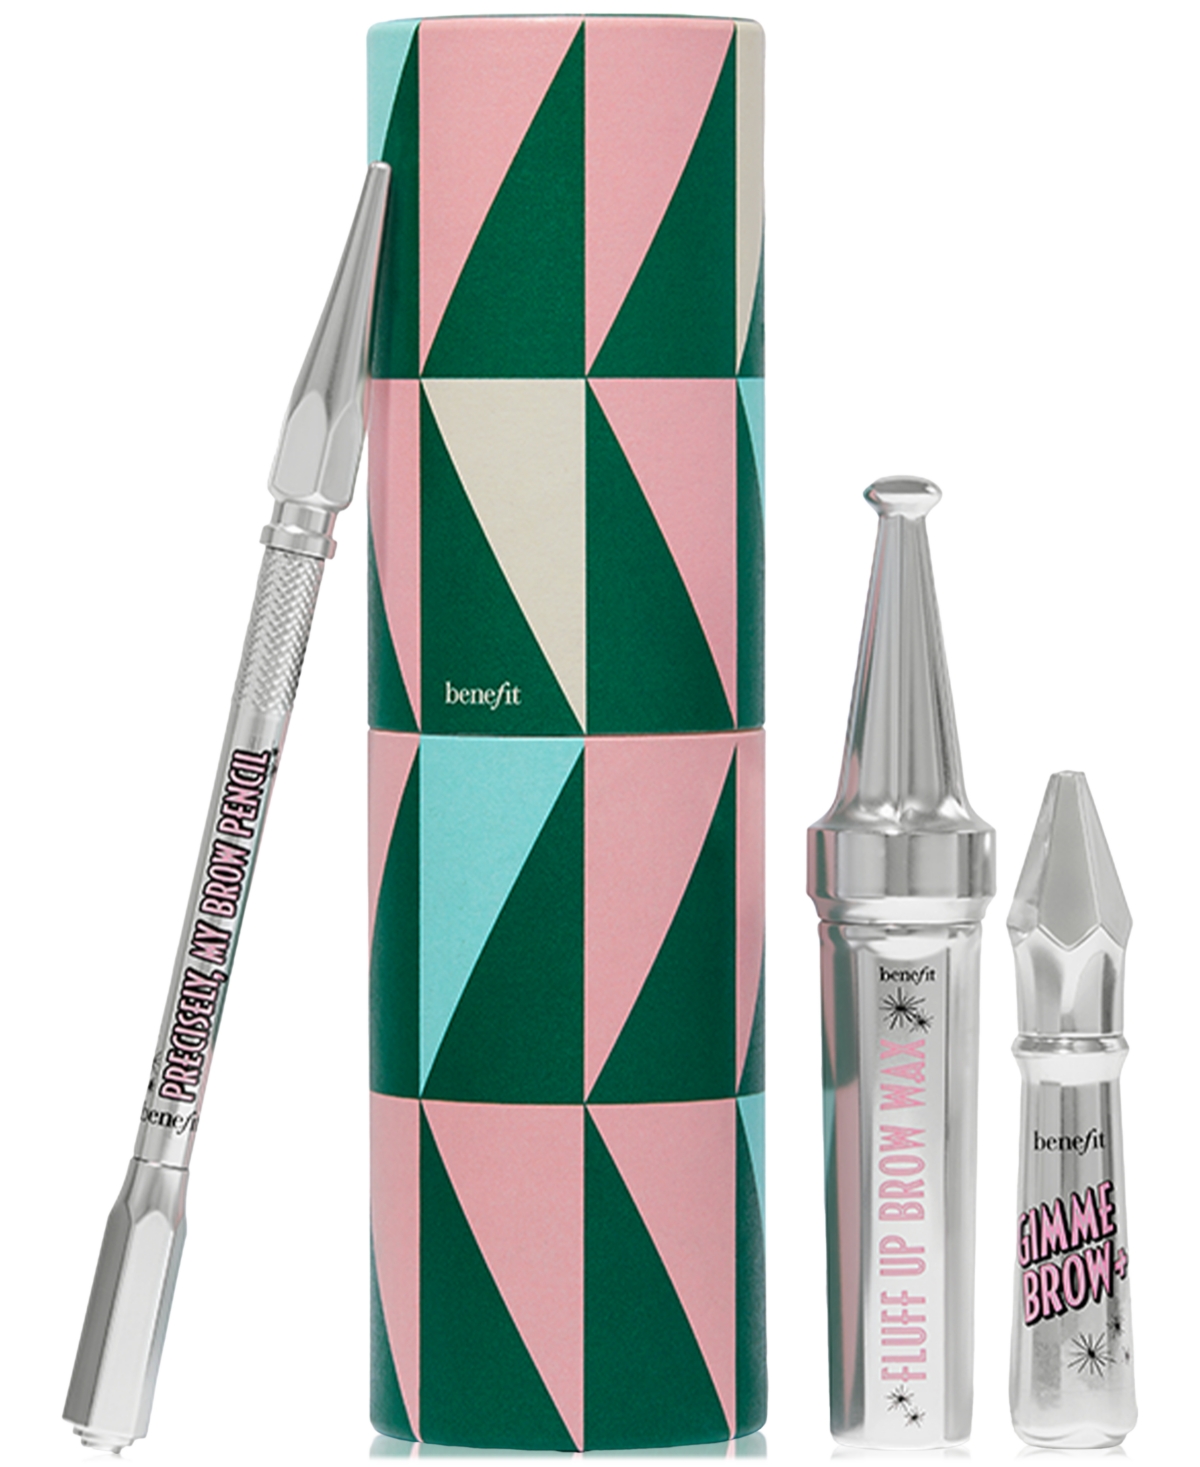 Benefit Cosmetics Fluffin' Festive Brows Full-size Brow Pencil, Gel & Wax Value Set In Shade